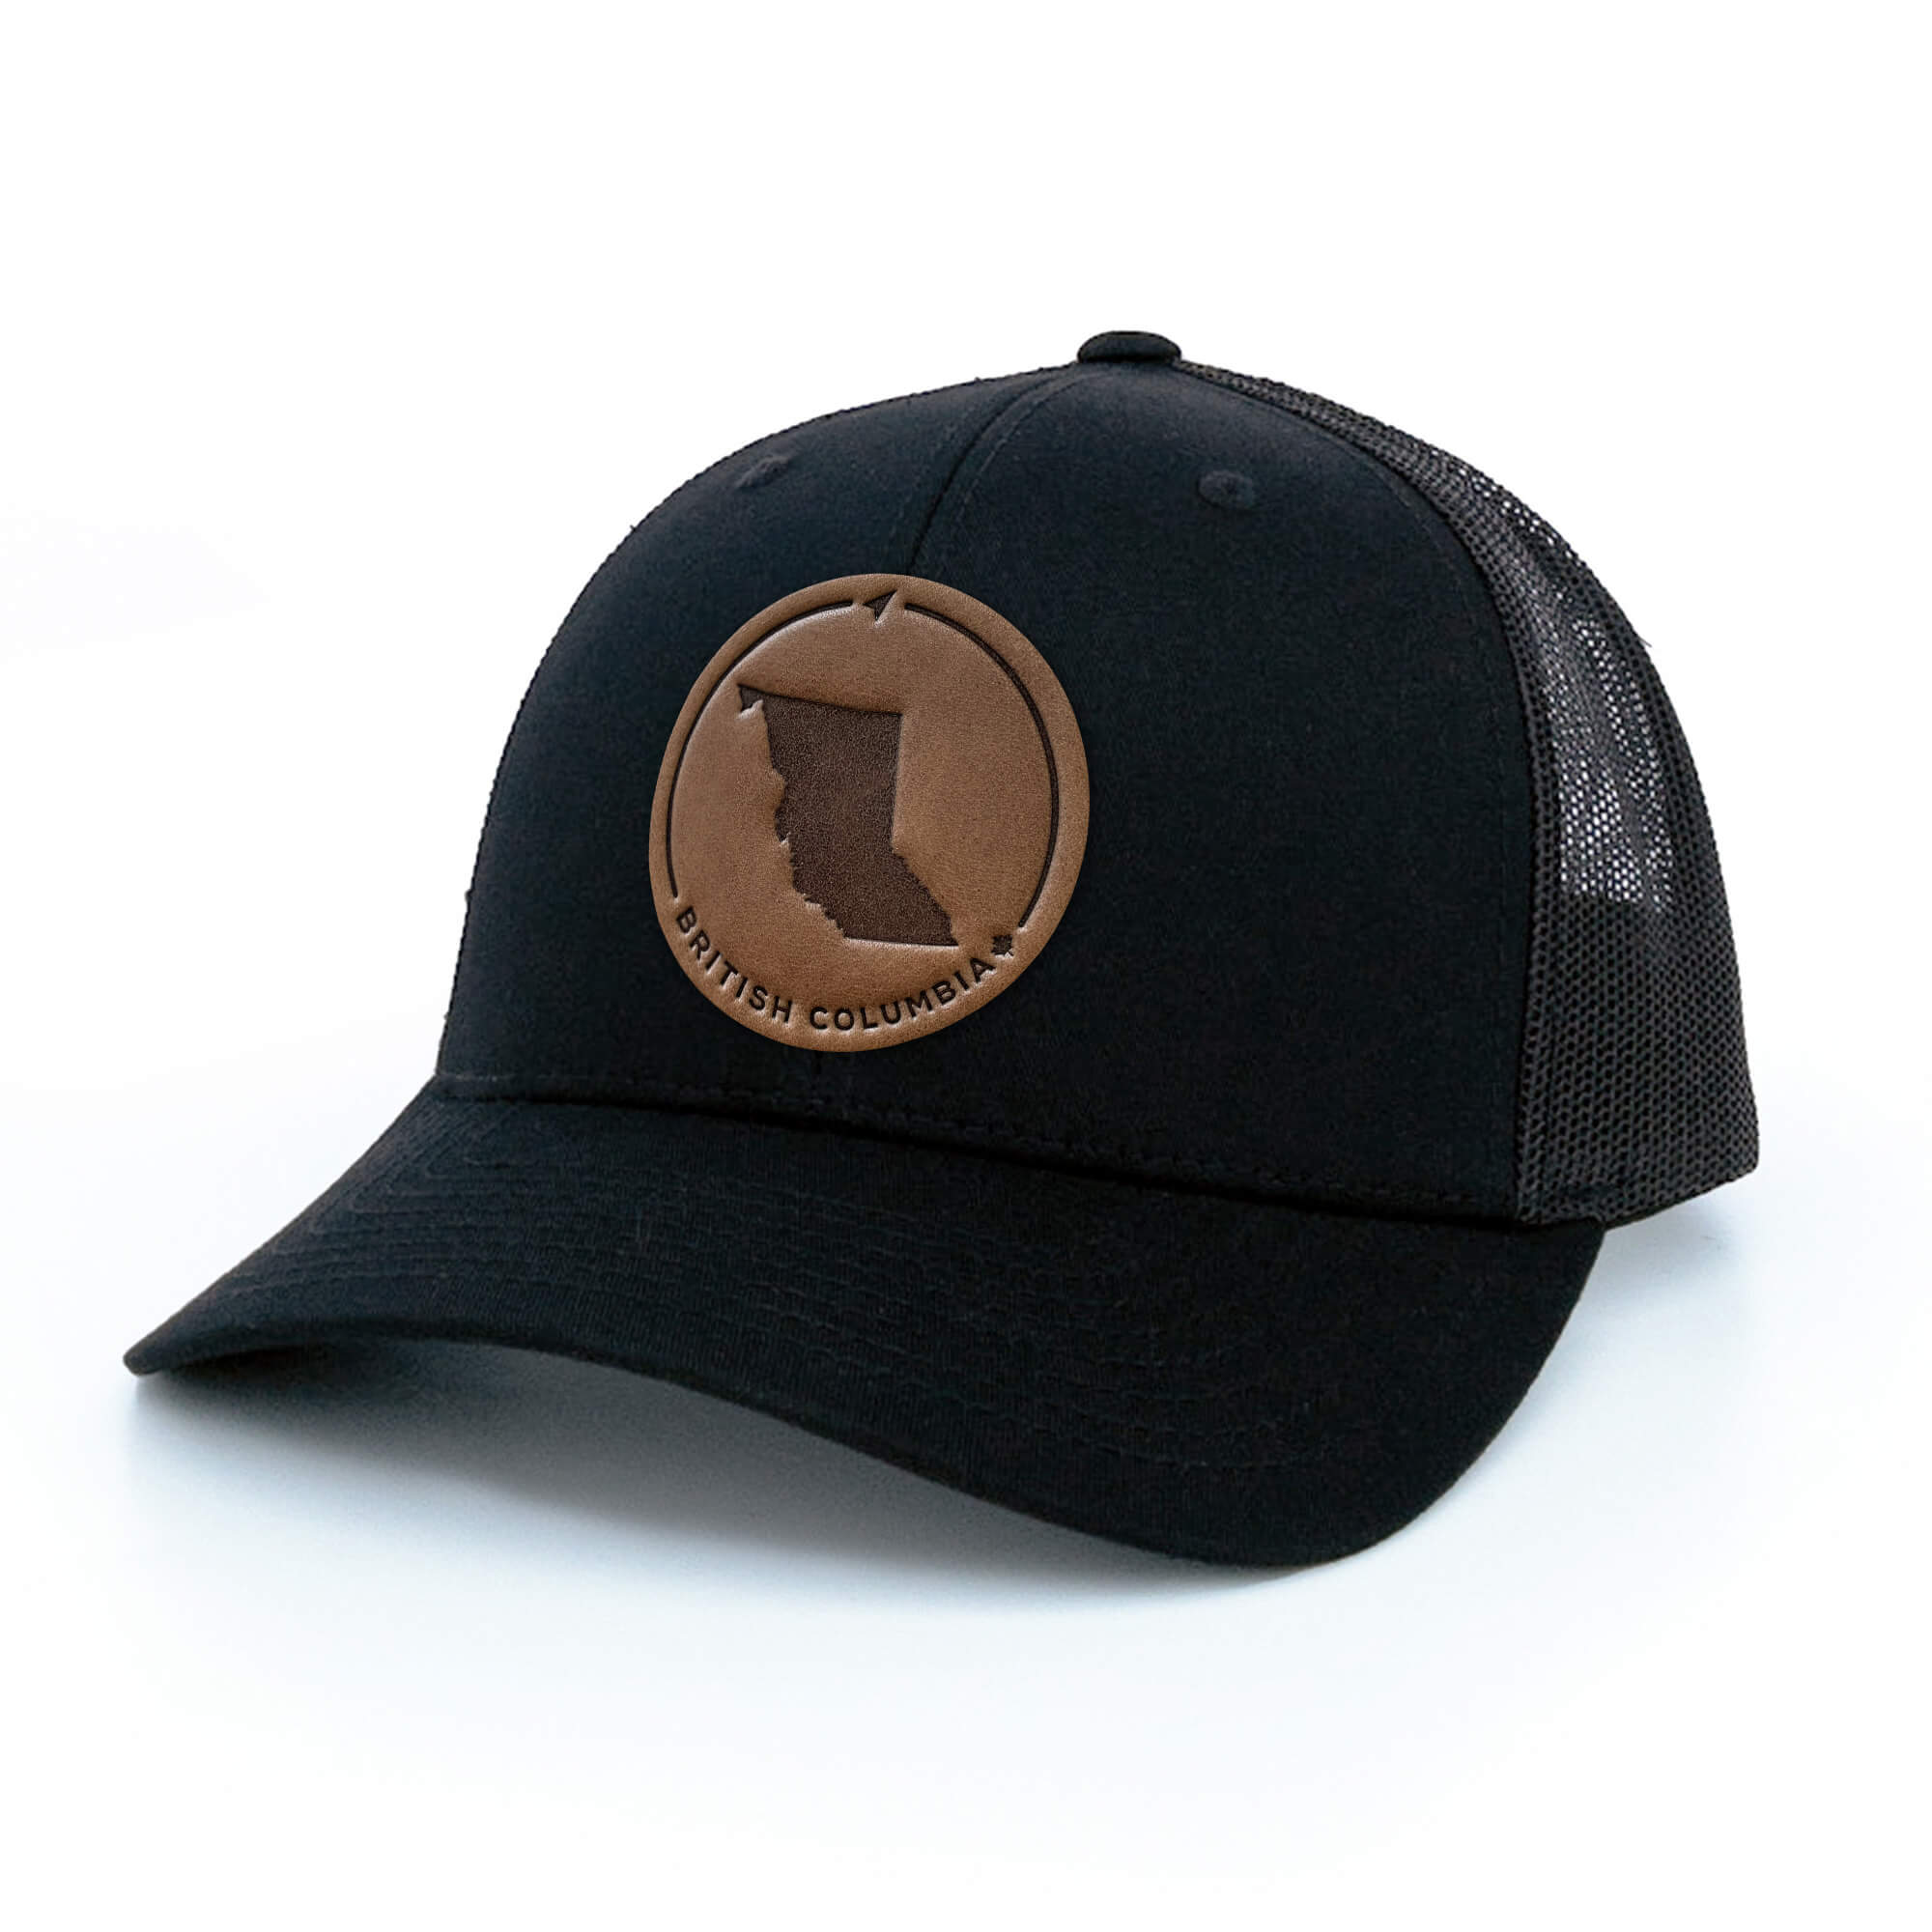 Black trucker hat with full-grain leather patch of British Columbia | BLACK-002-004, CHARC-002-004, NAVY-002-004, HGREY-002-004, MOSS-002-004, BROWN-002-004